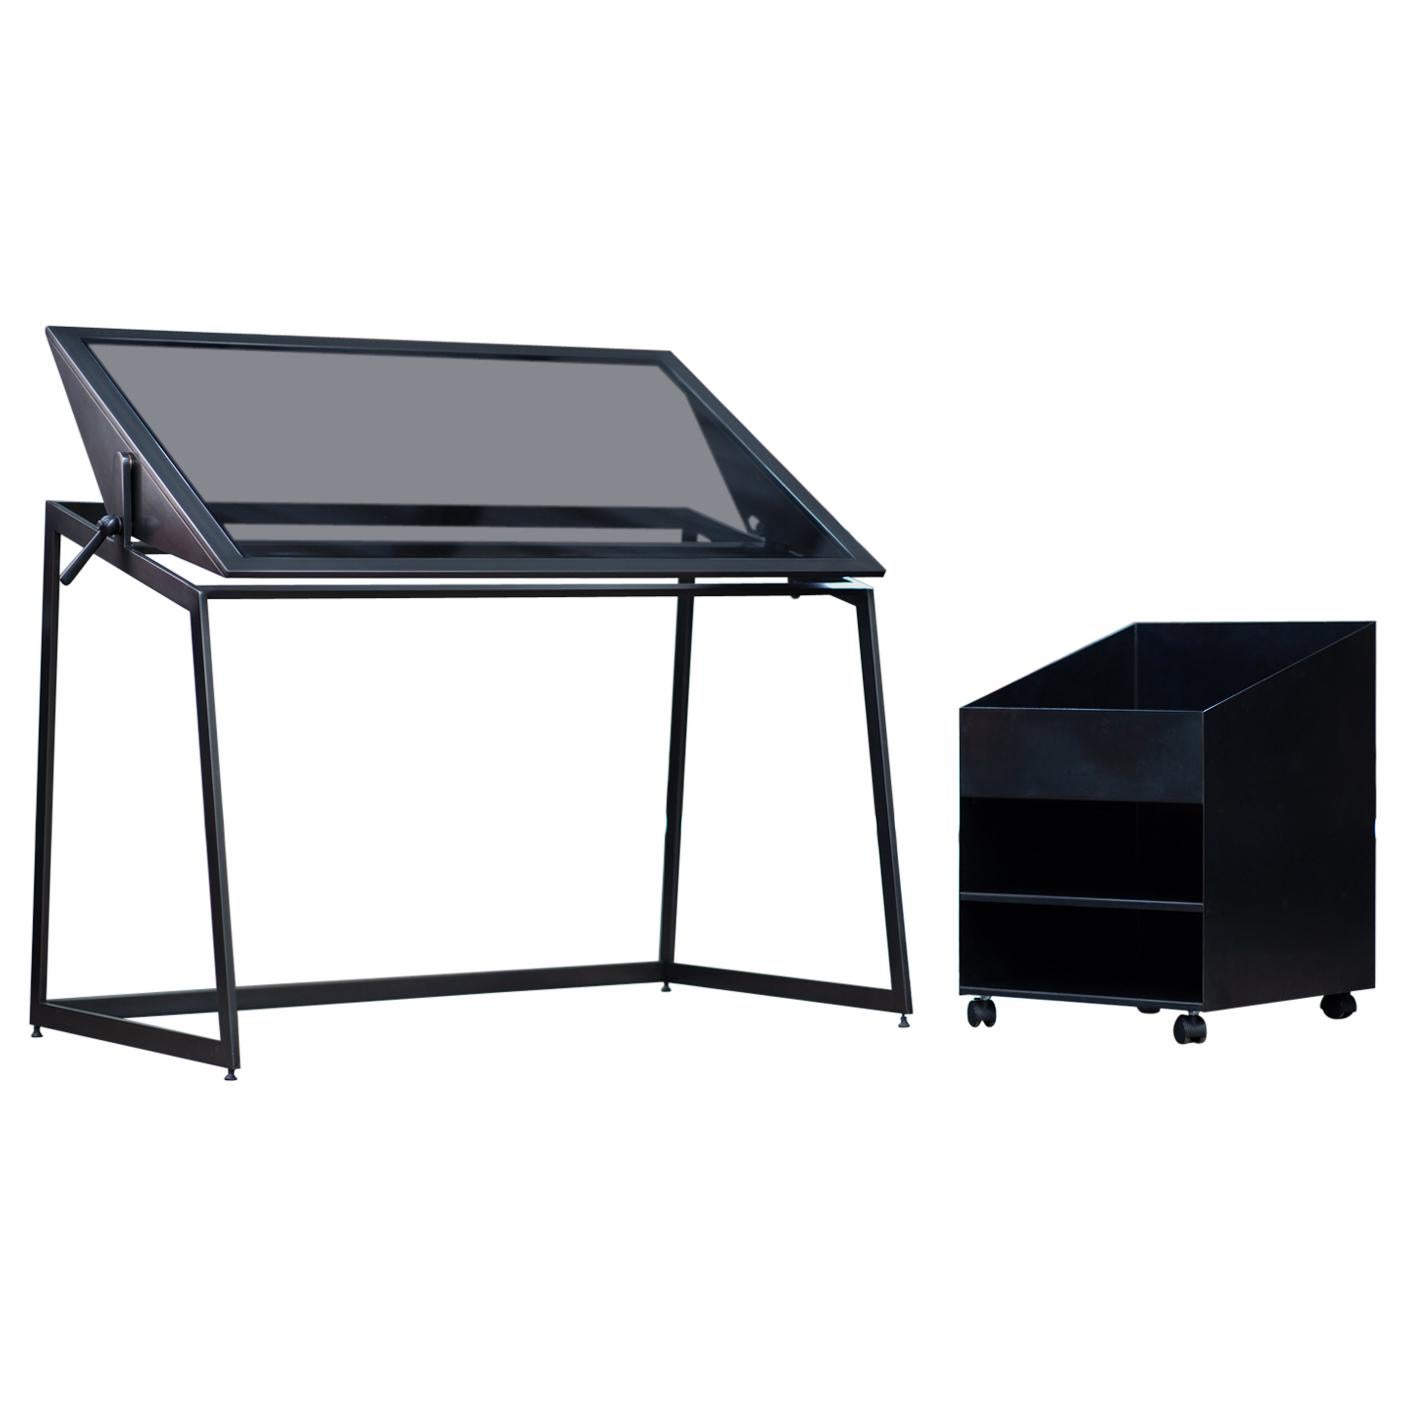 Drafting Table and Caddy in Blackened Steel and Smoked Glass by Force/Collide